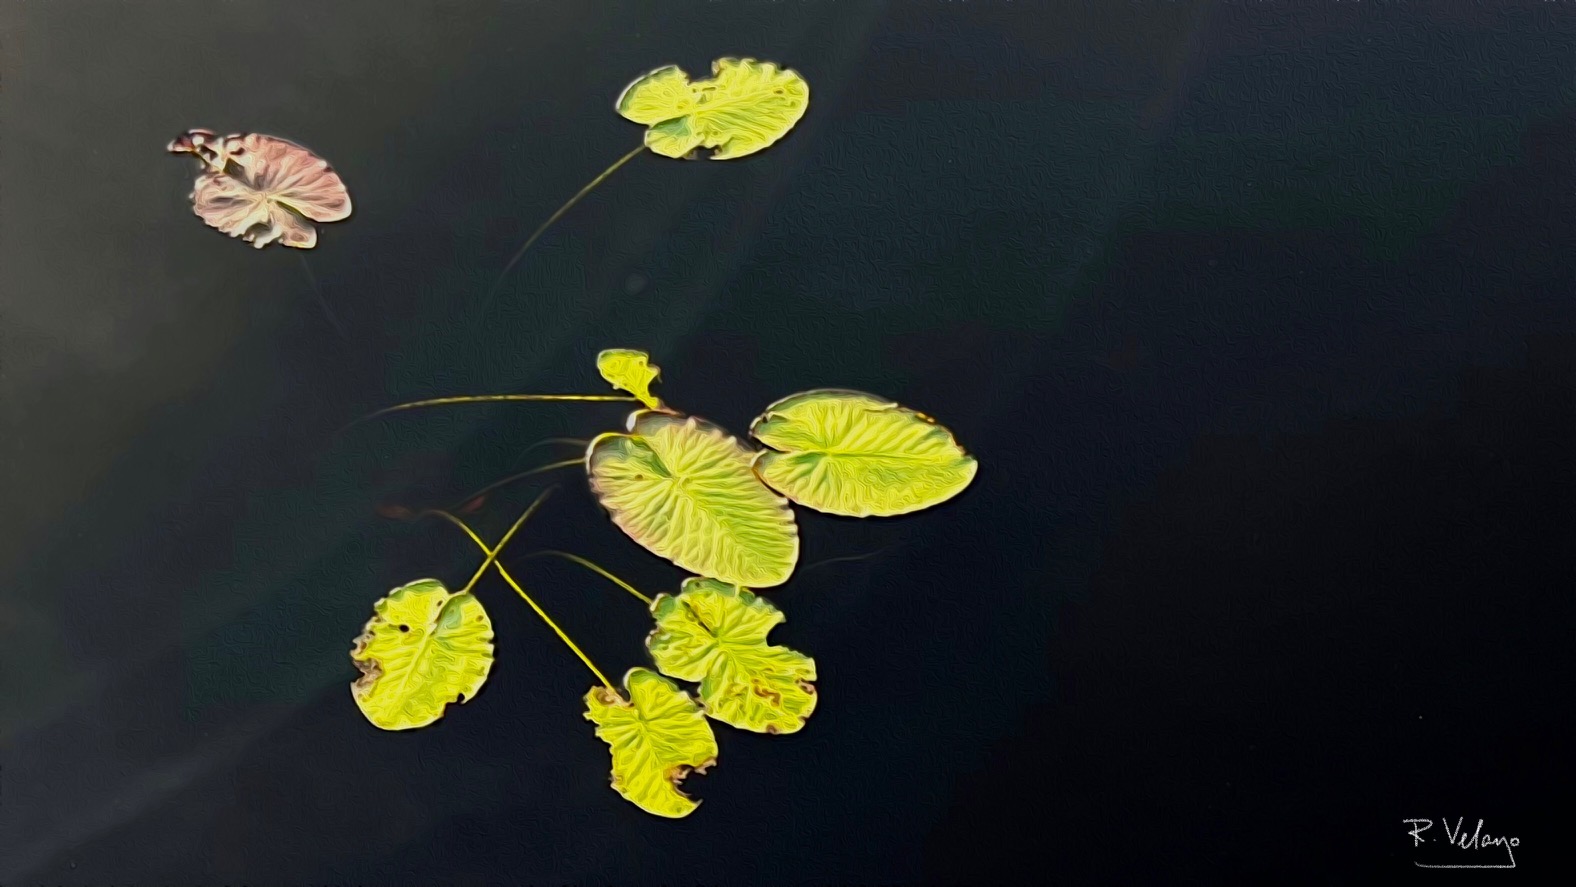 "WATER LILY ON LAKE DAVENPORT" [Created: 4/27/2022]